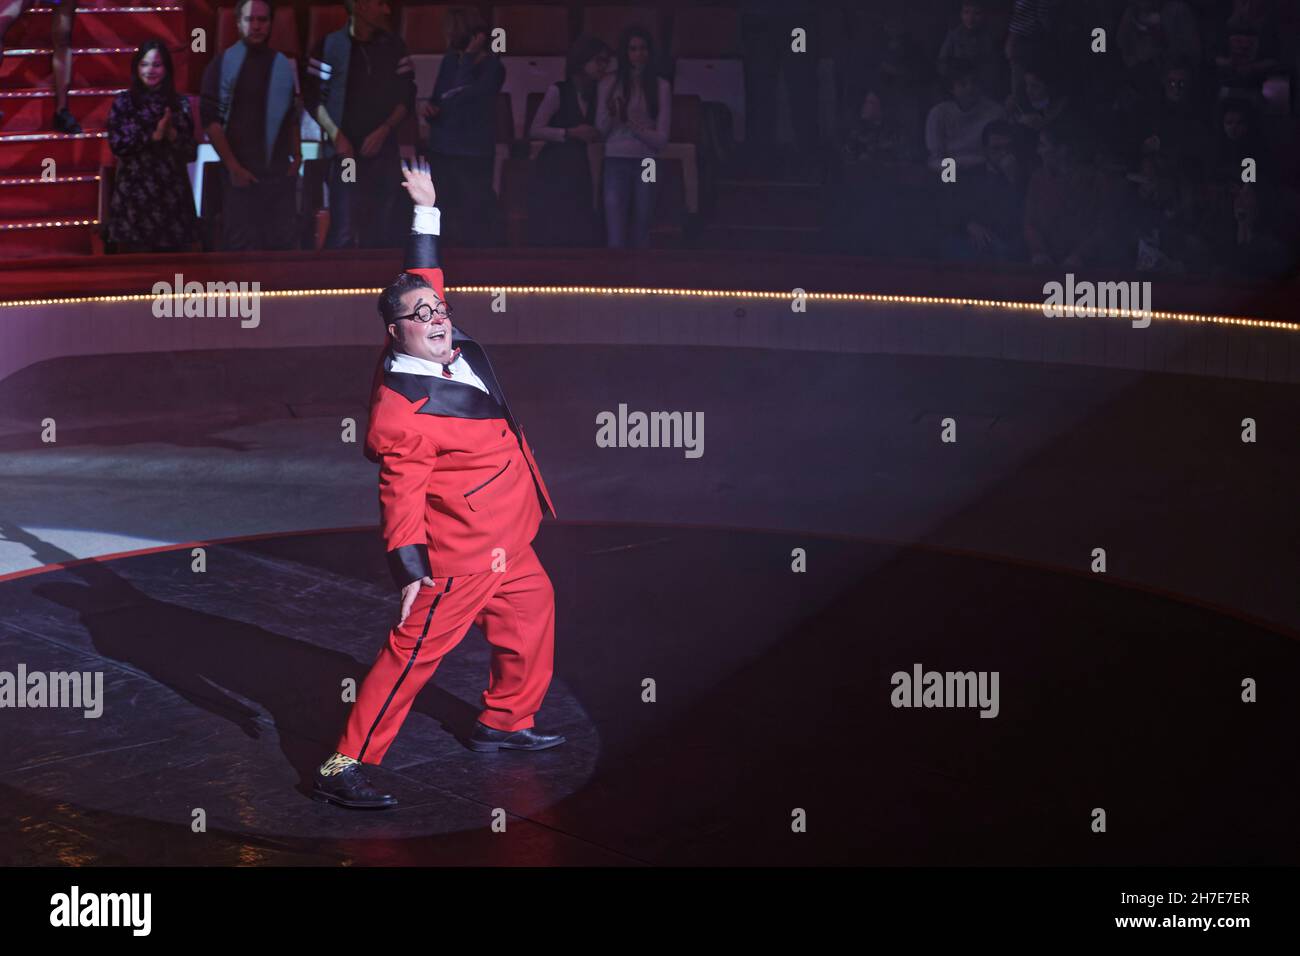 Paris, France. 20th Nov, 2021. Totti, clown performs during Cirque Bouglione's 'Dingue' show at the Cirque d'Hiver on November 20, 2021 in Paris. Stock Photo